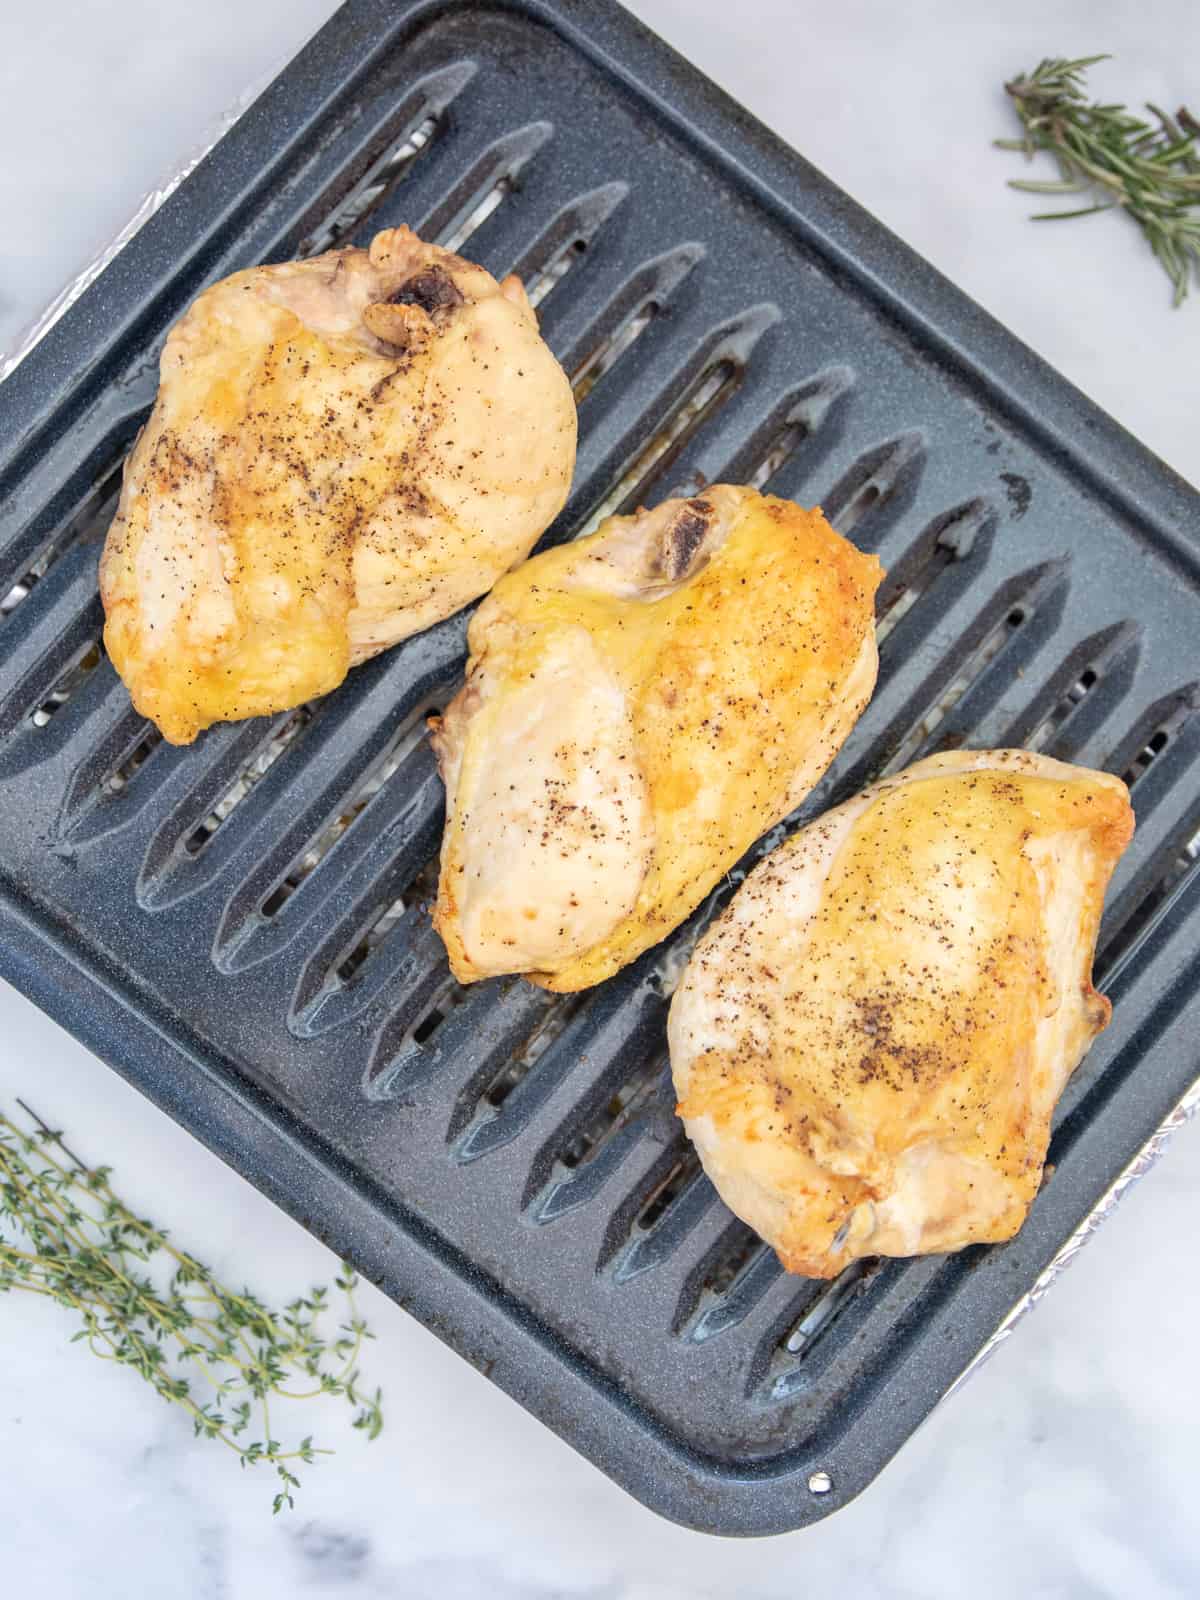 Roasted Split Chicken Breast on broiler pan next to fresh thyme.